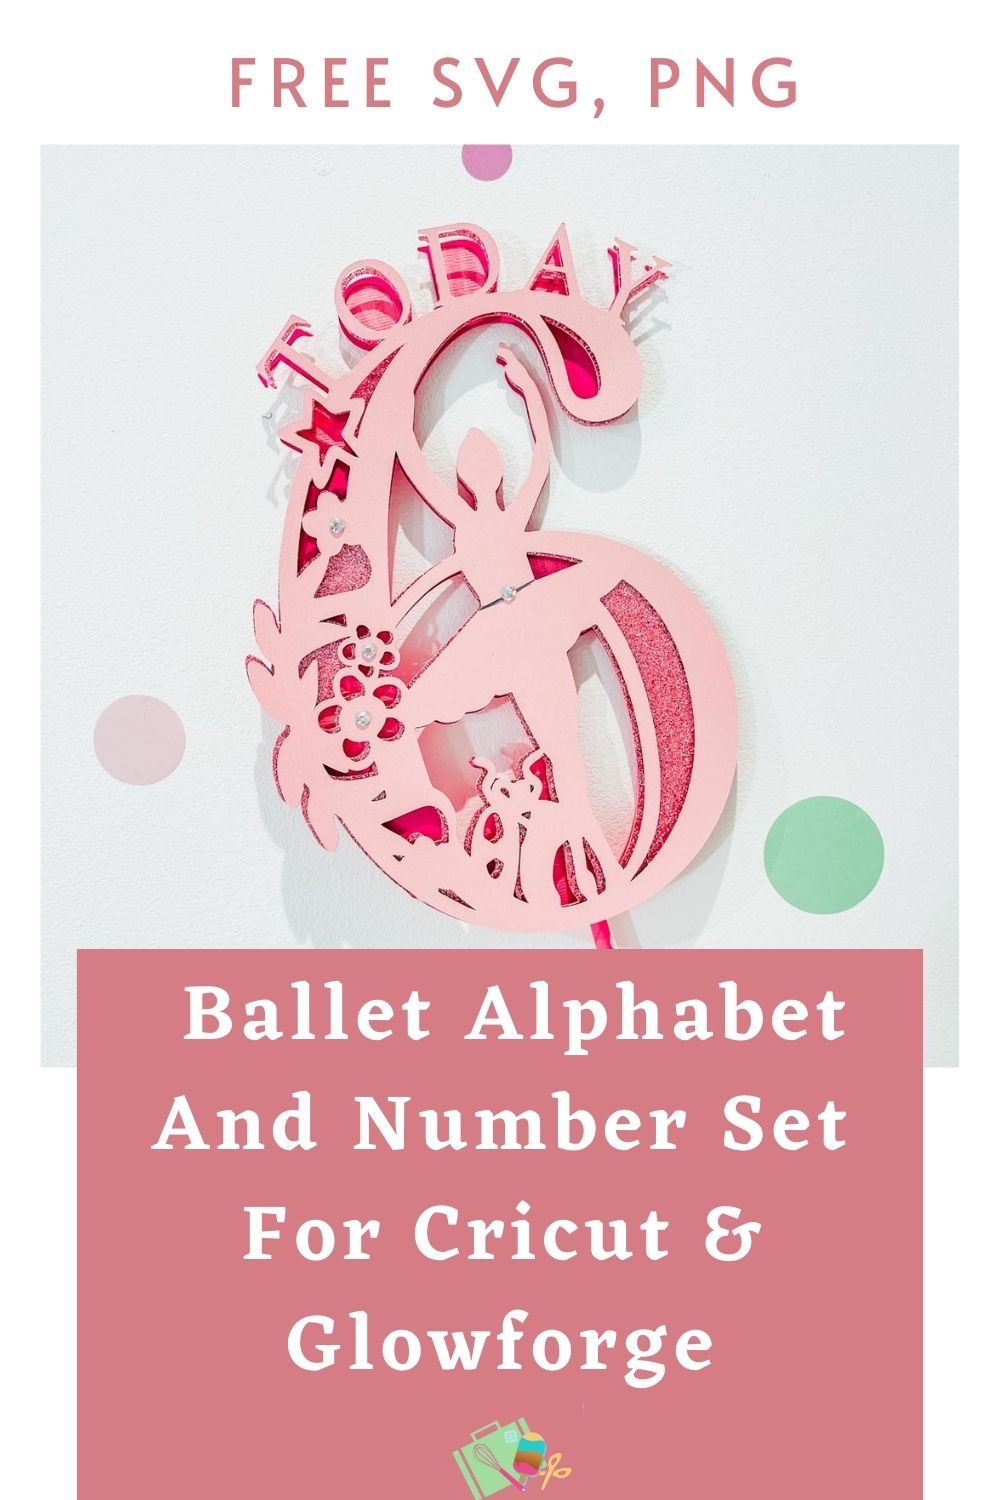 Ballet Alphabet and Number Set for Cricut And Glowforge , Free SVG and PNG